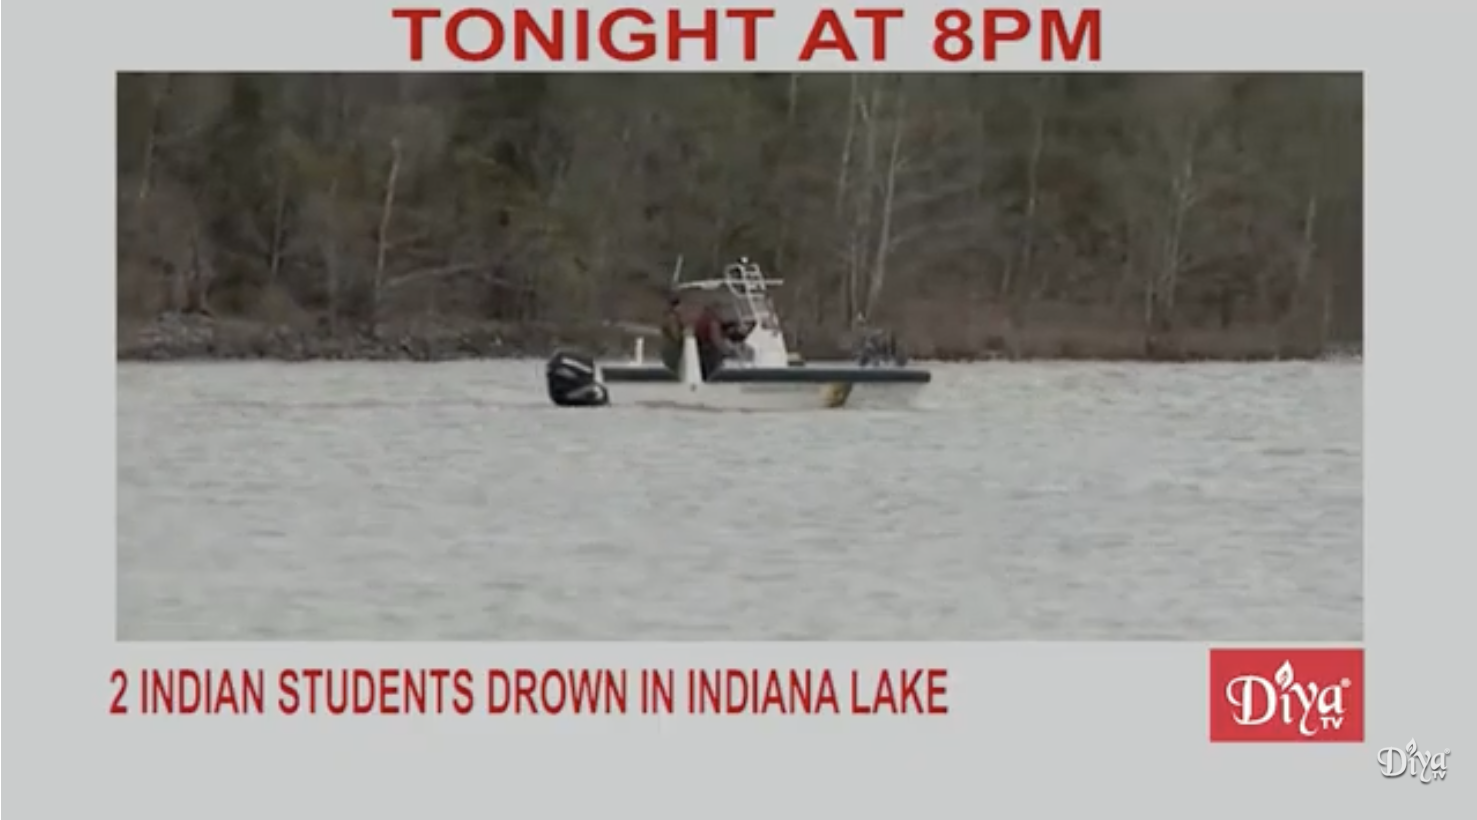 Two Indian students drown in Indiana lake